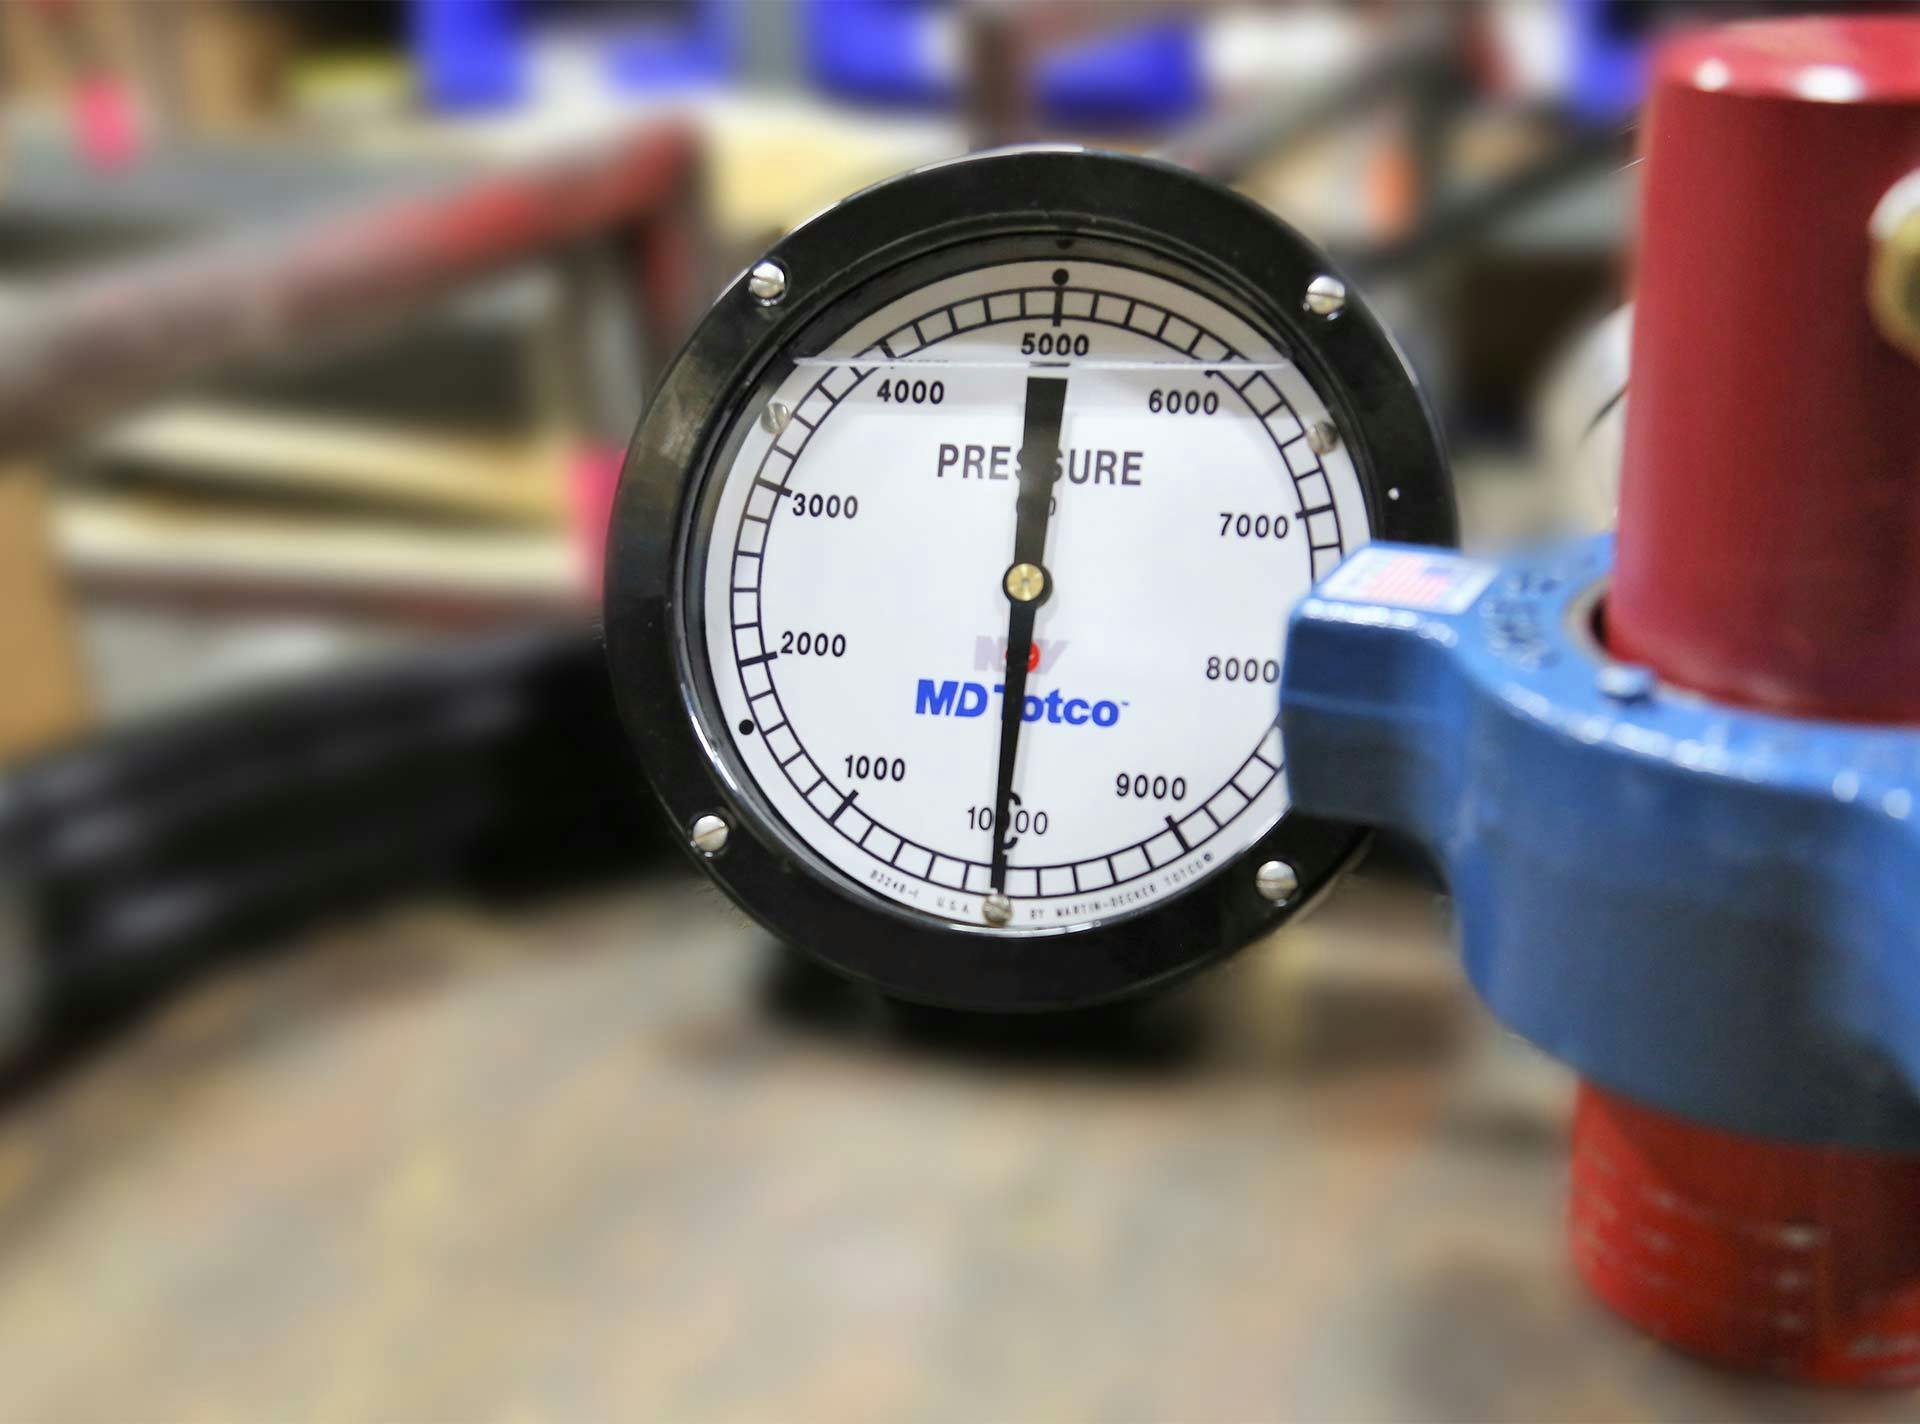 A pressure indicator attached to a piece of equipment